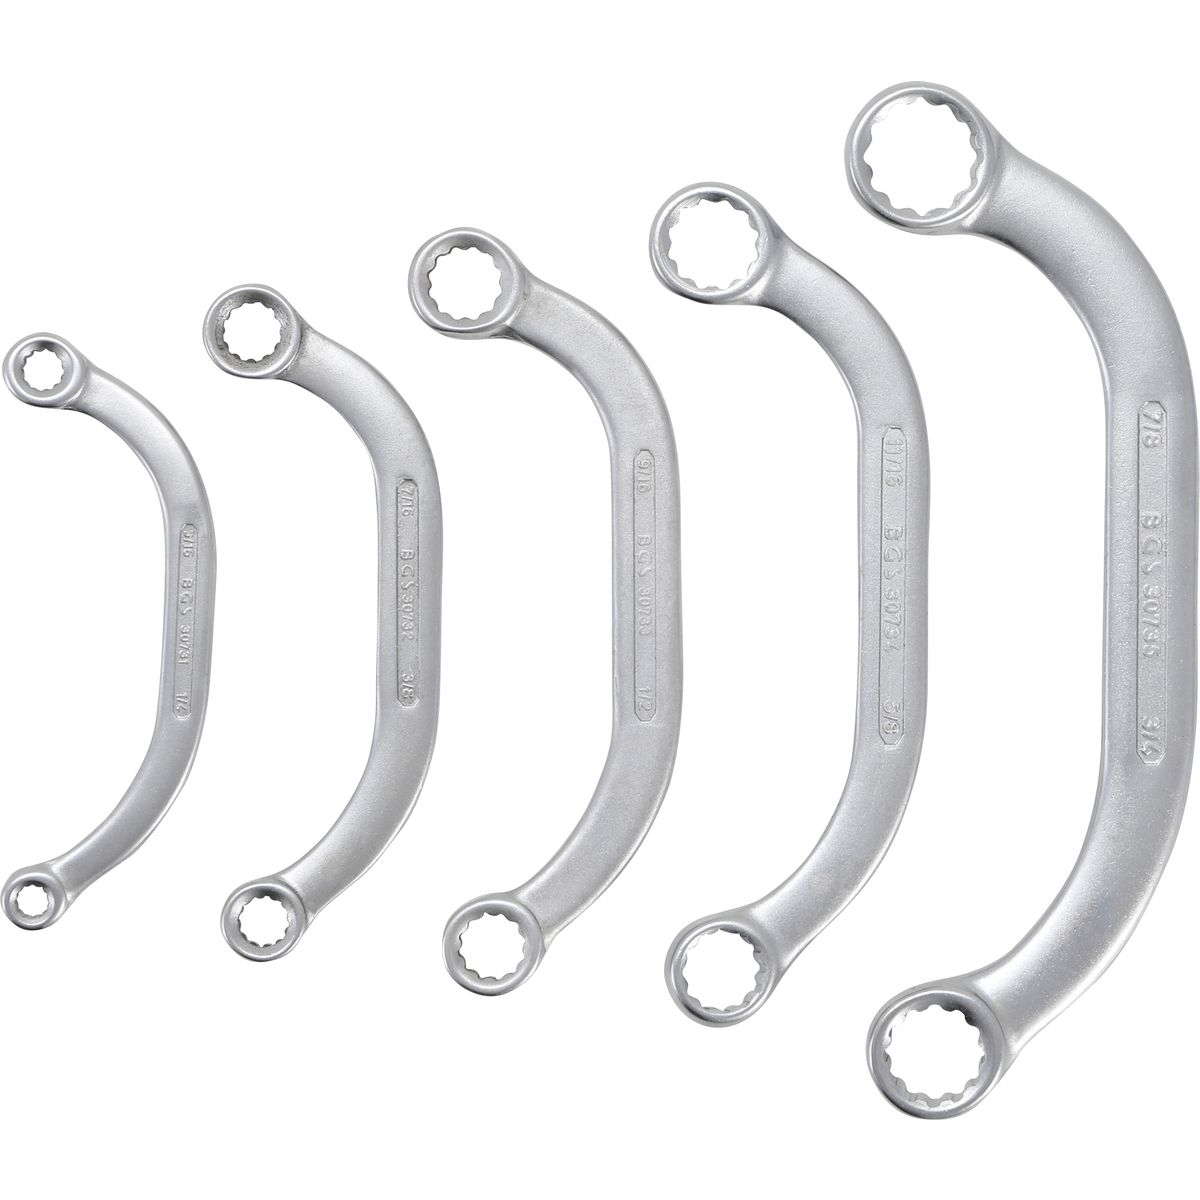 Obstruction Ring Spanner Set | Inch Sizes | 1/4" - 7/8" | 5 pcs.